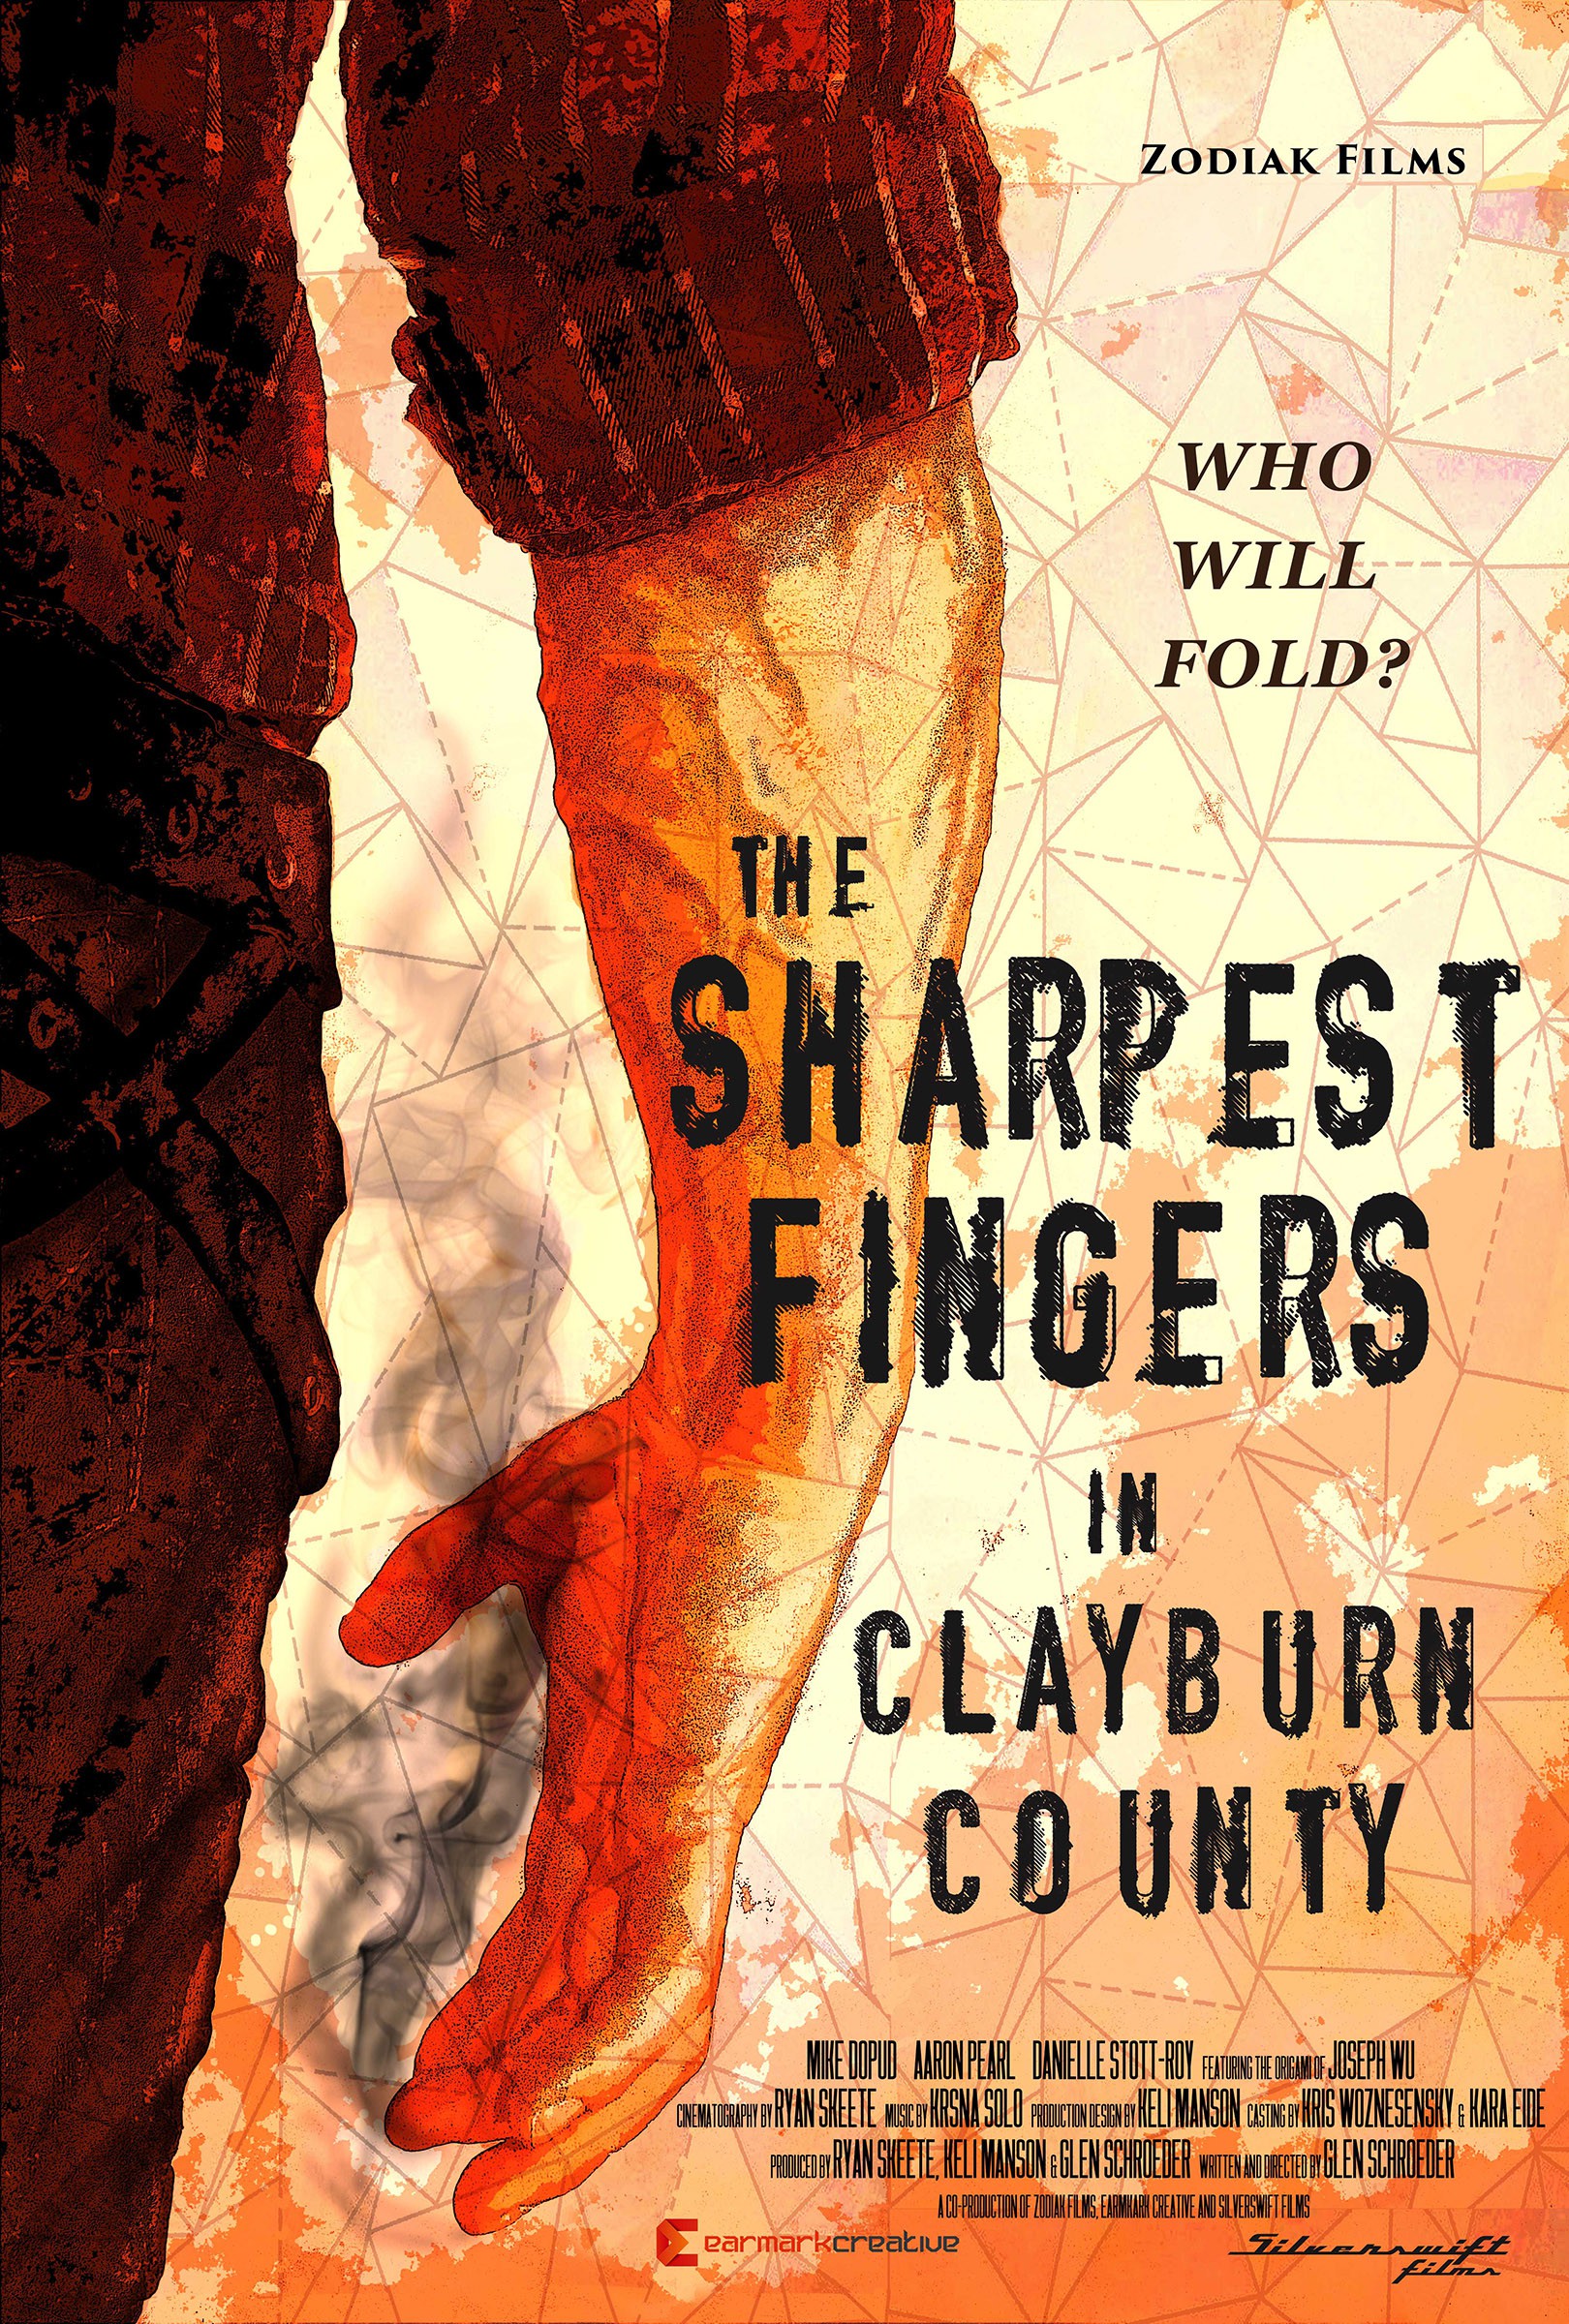 Mega Sized Movie Poster Image for The Sharpest Fingers in Clayburn County